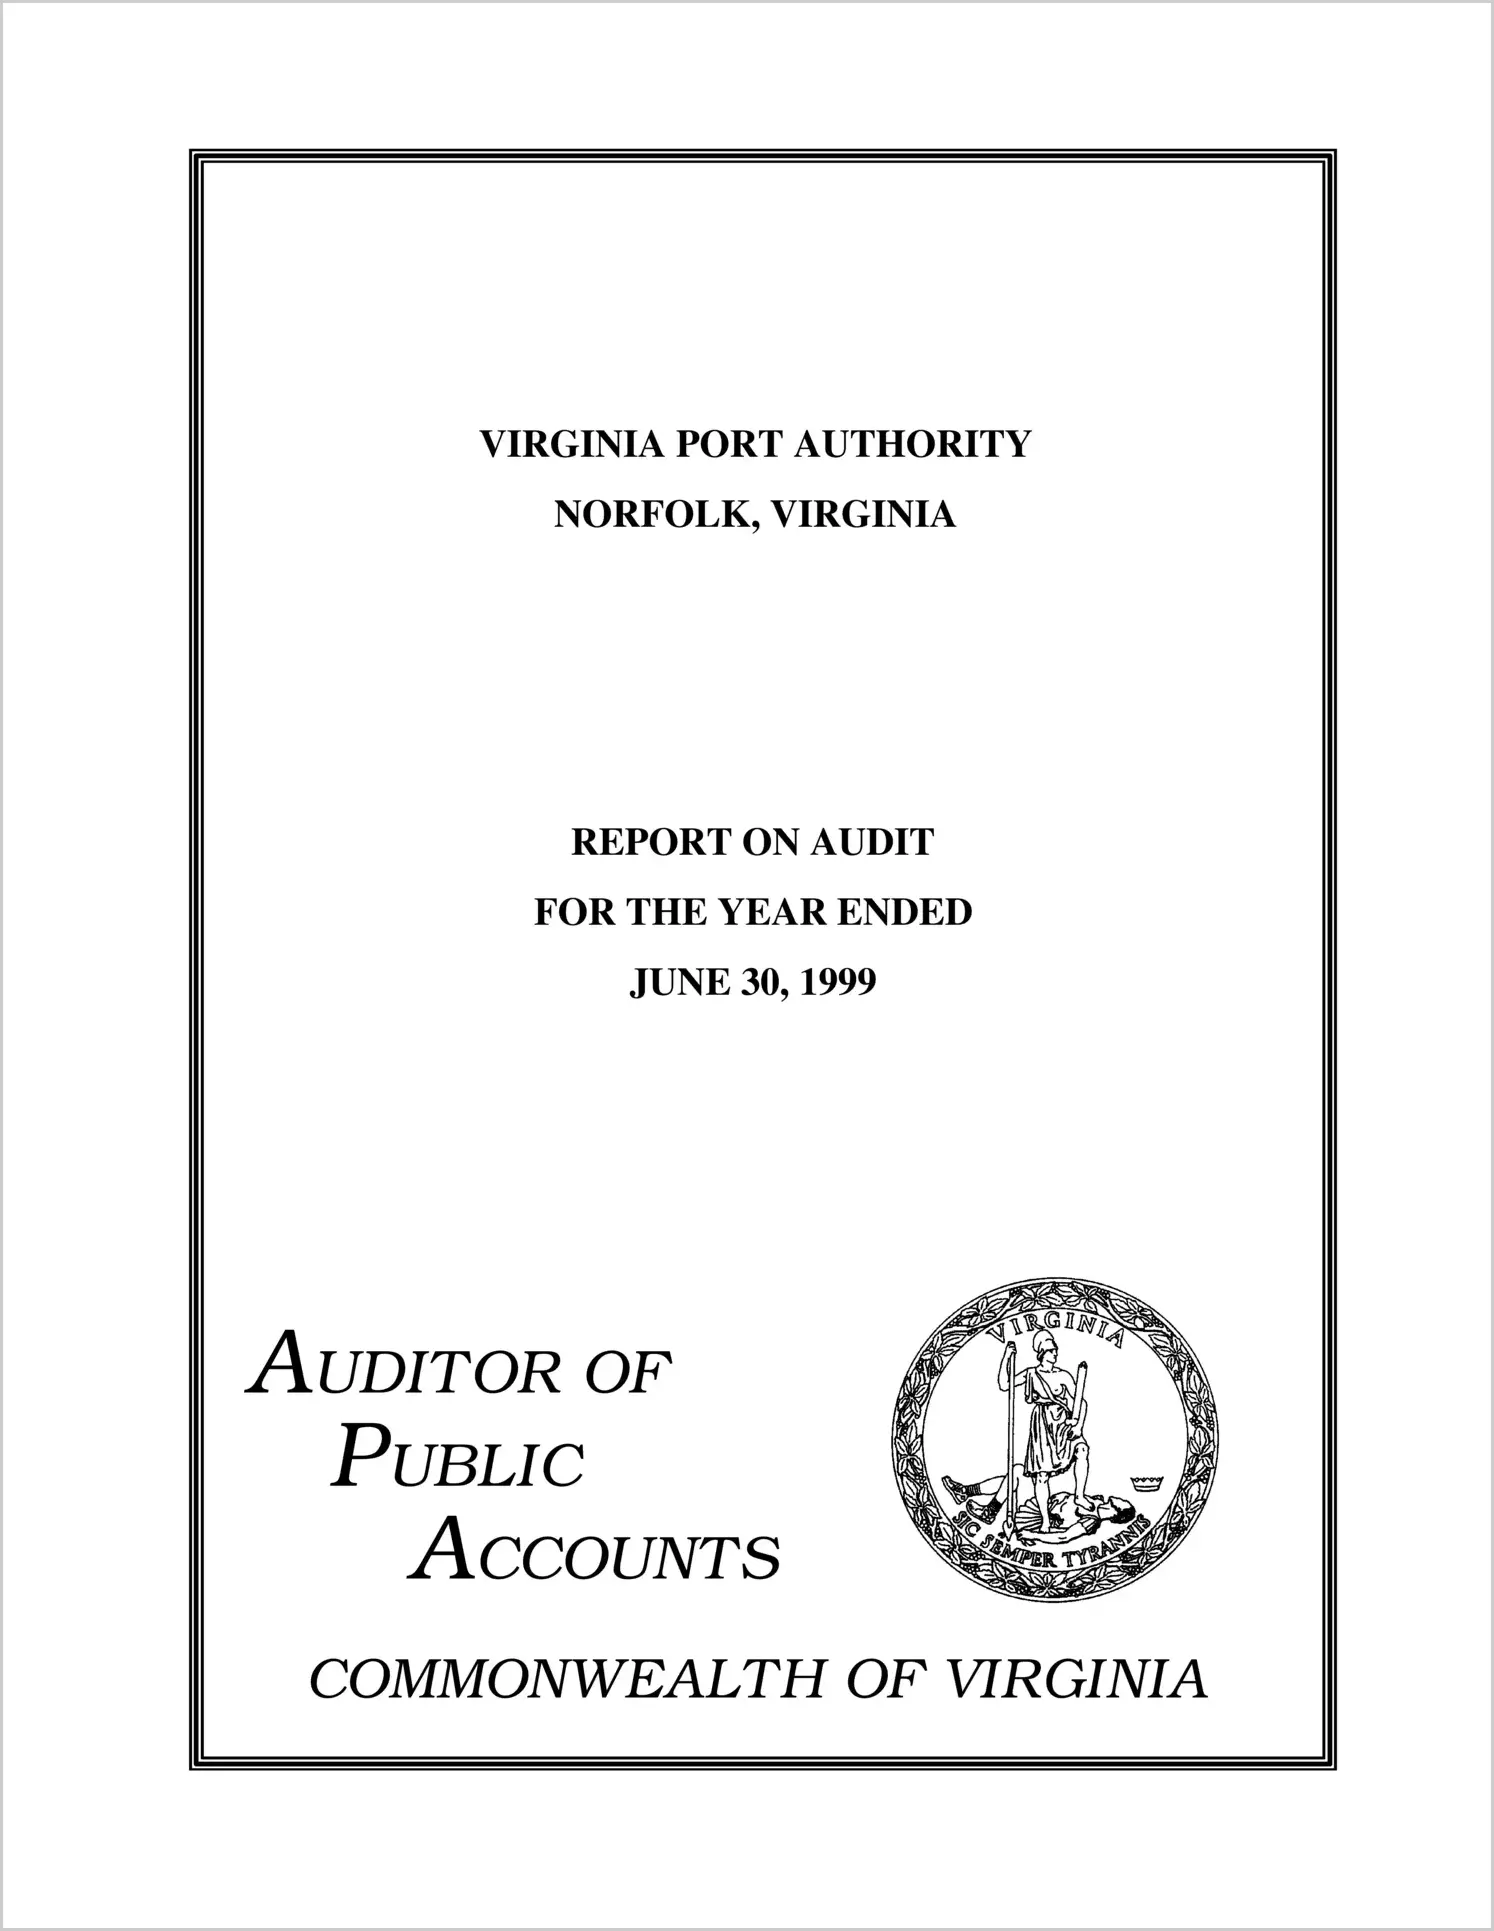 Virginia Port Authority for the year ended June 30, 1999